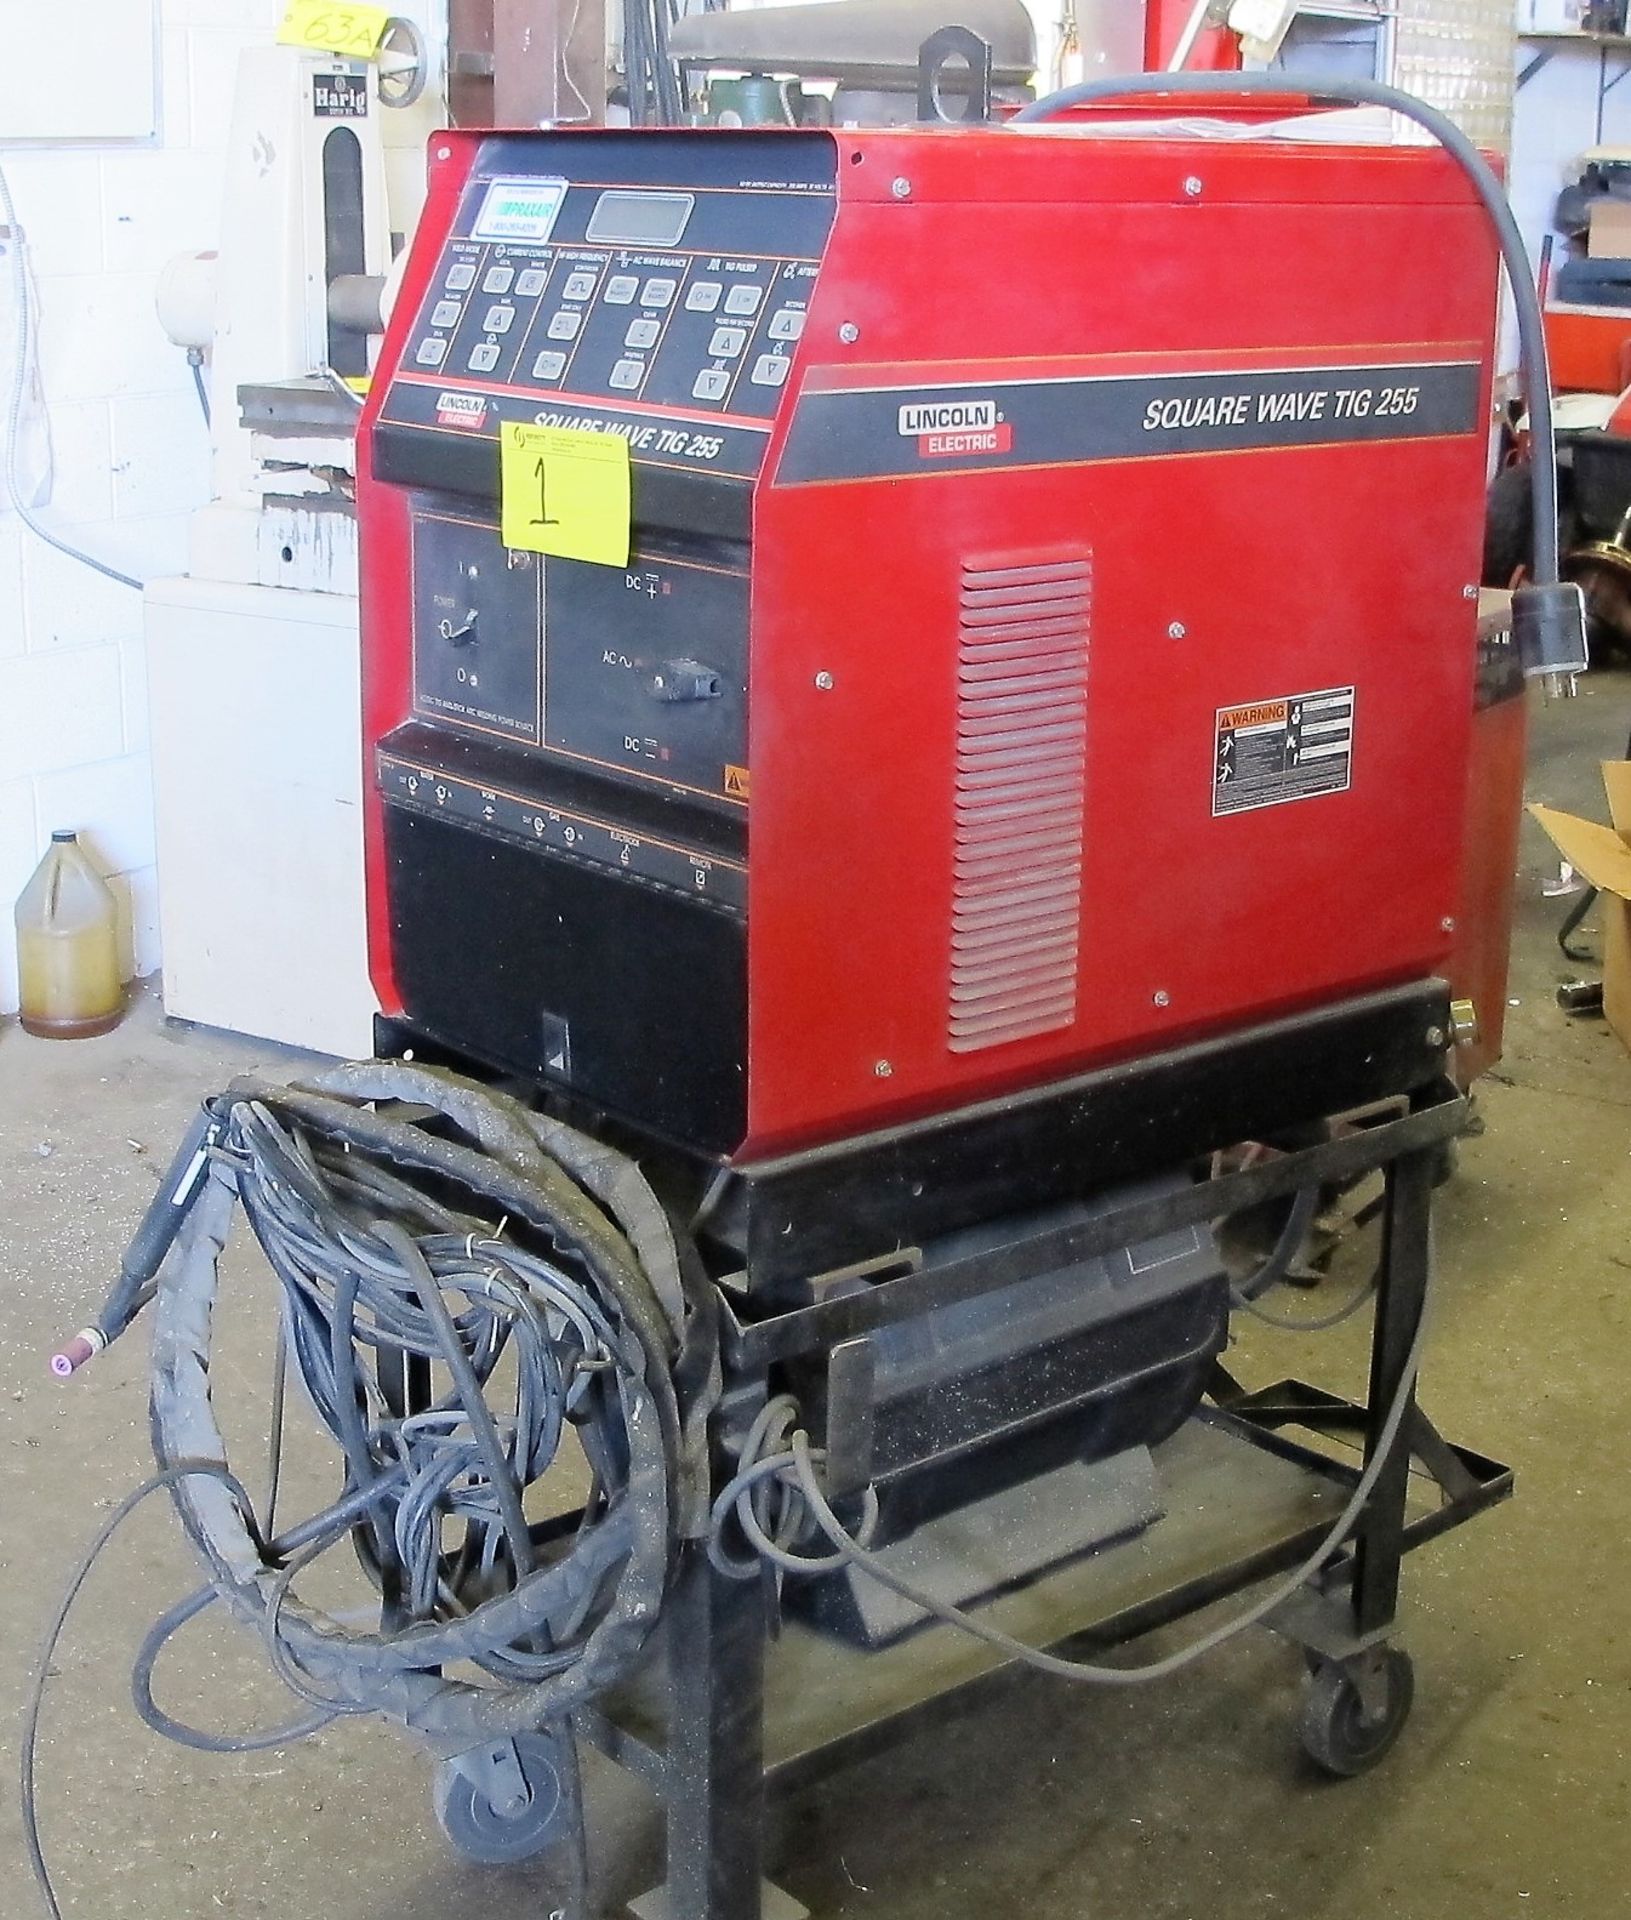 LINCOLN ELECTRIC SQUARE WAVE TIG 255 WELDER W/LA105939 COOLING SYSTEM, CART AND CABLES - Image 4 of 4